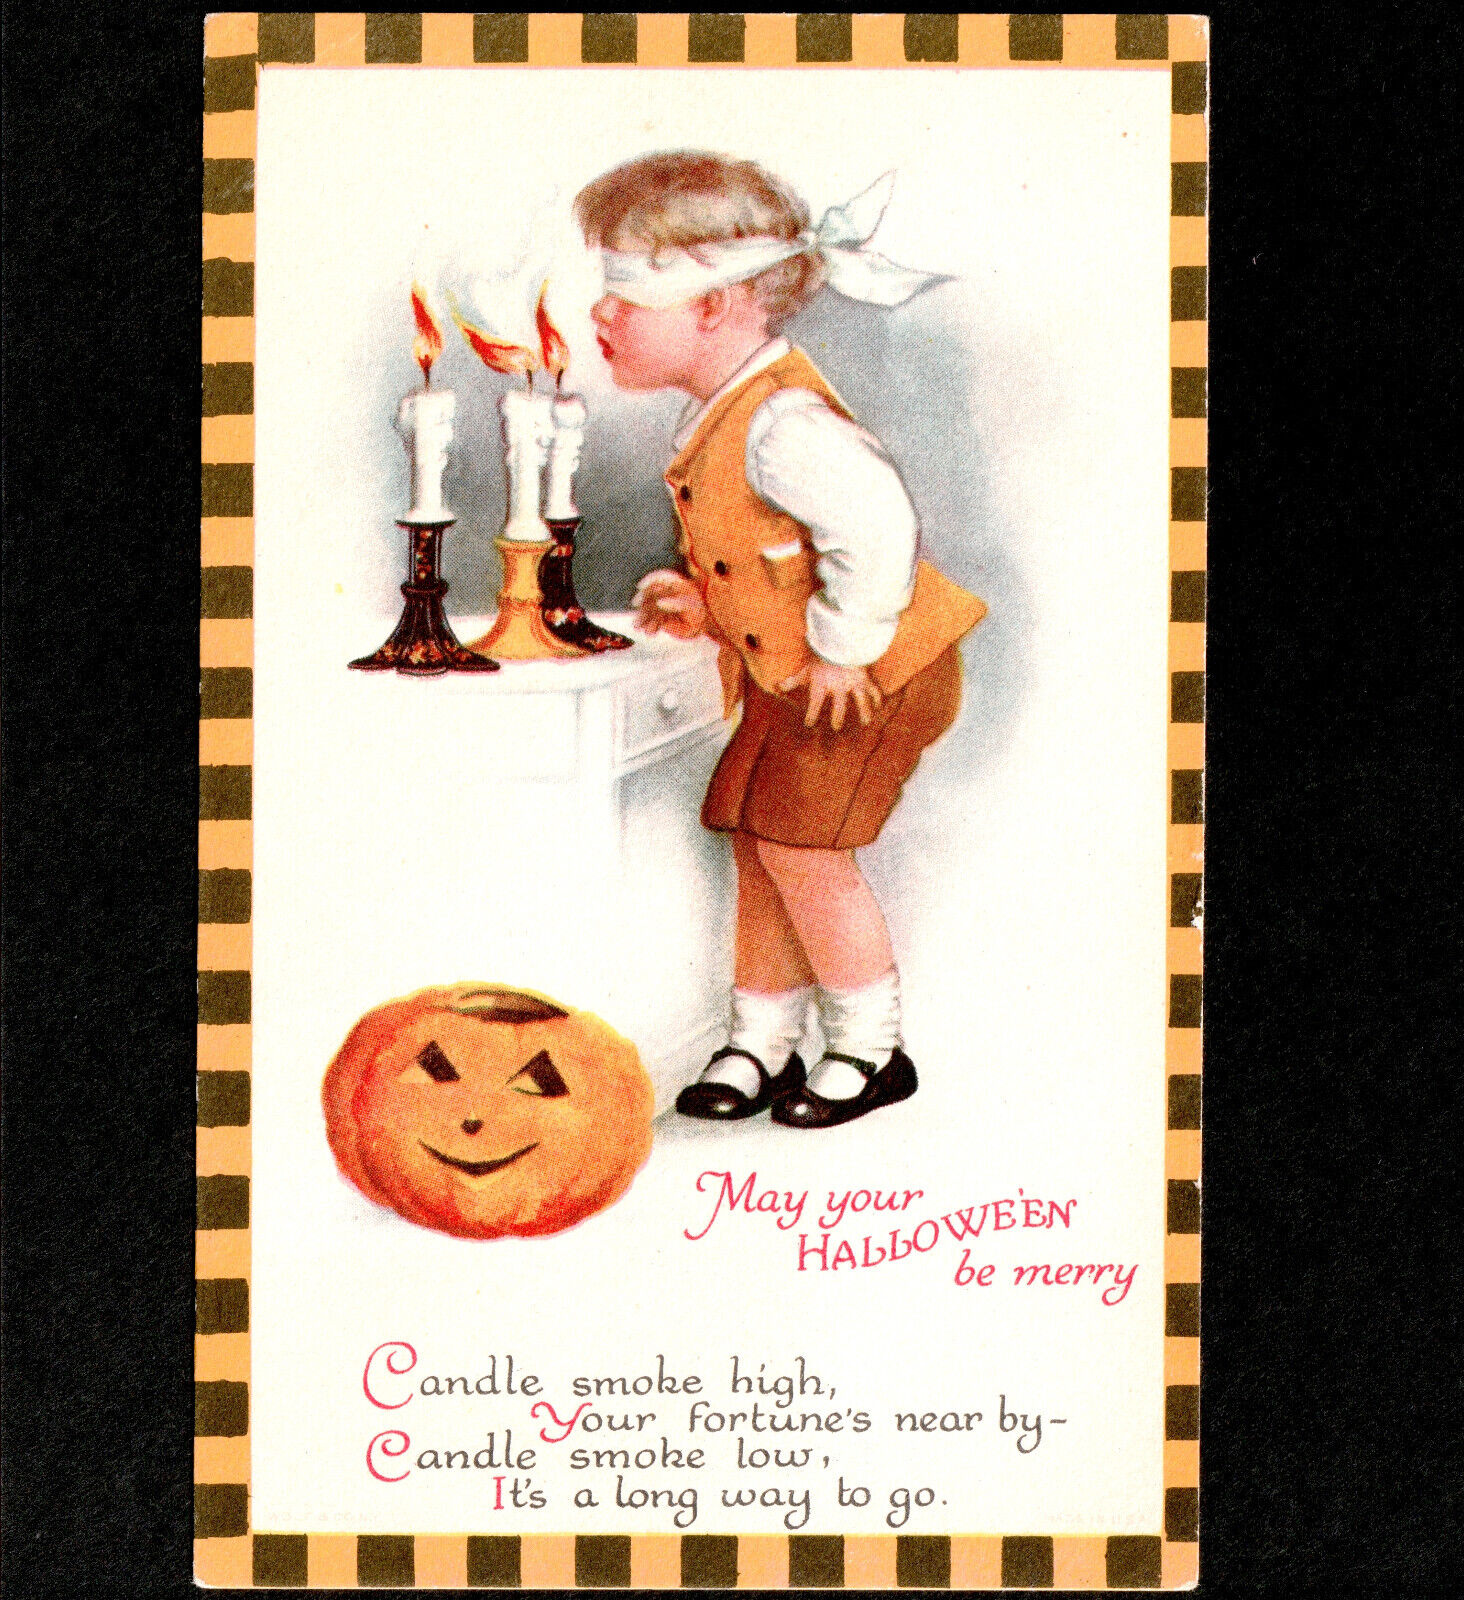 May Your Halloween Be Merry Ellen Clapsaddle Wolf 31-4 Candle Smoke JOL PostCard